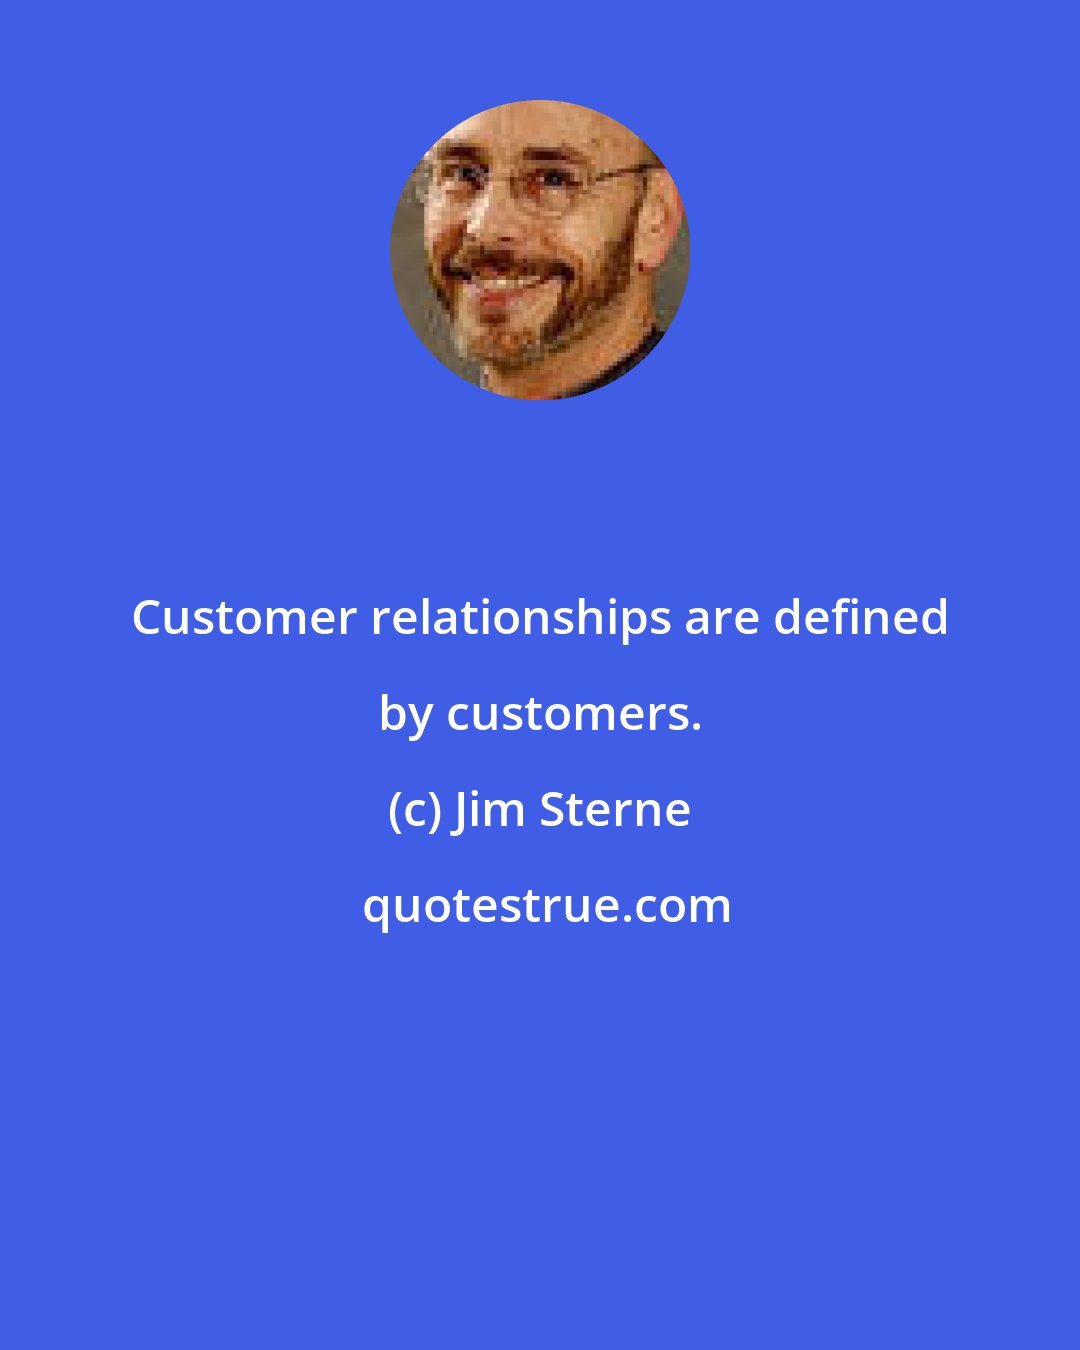 Jim Sterne: Customer relationships are defined by customers.